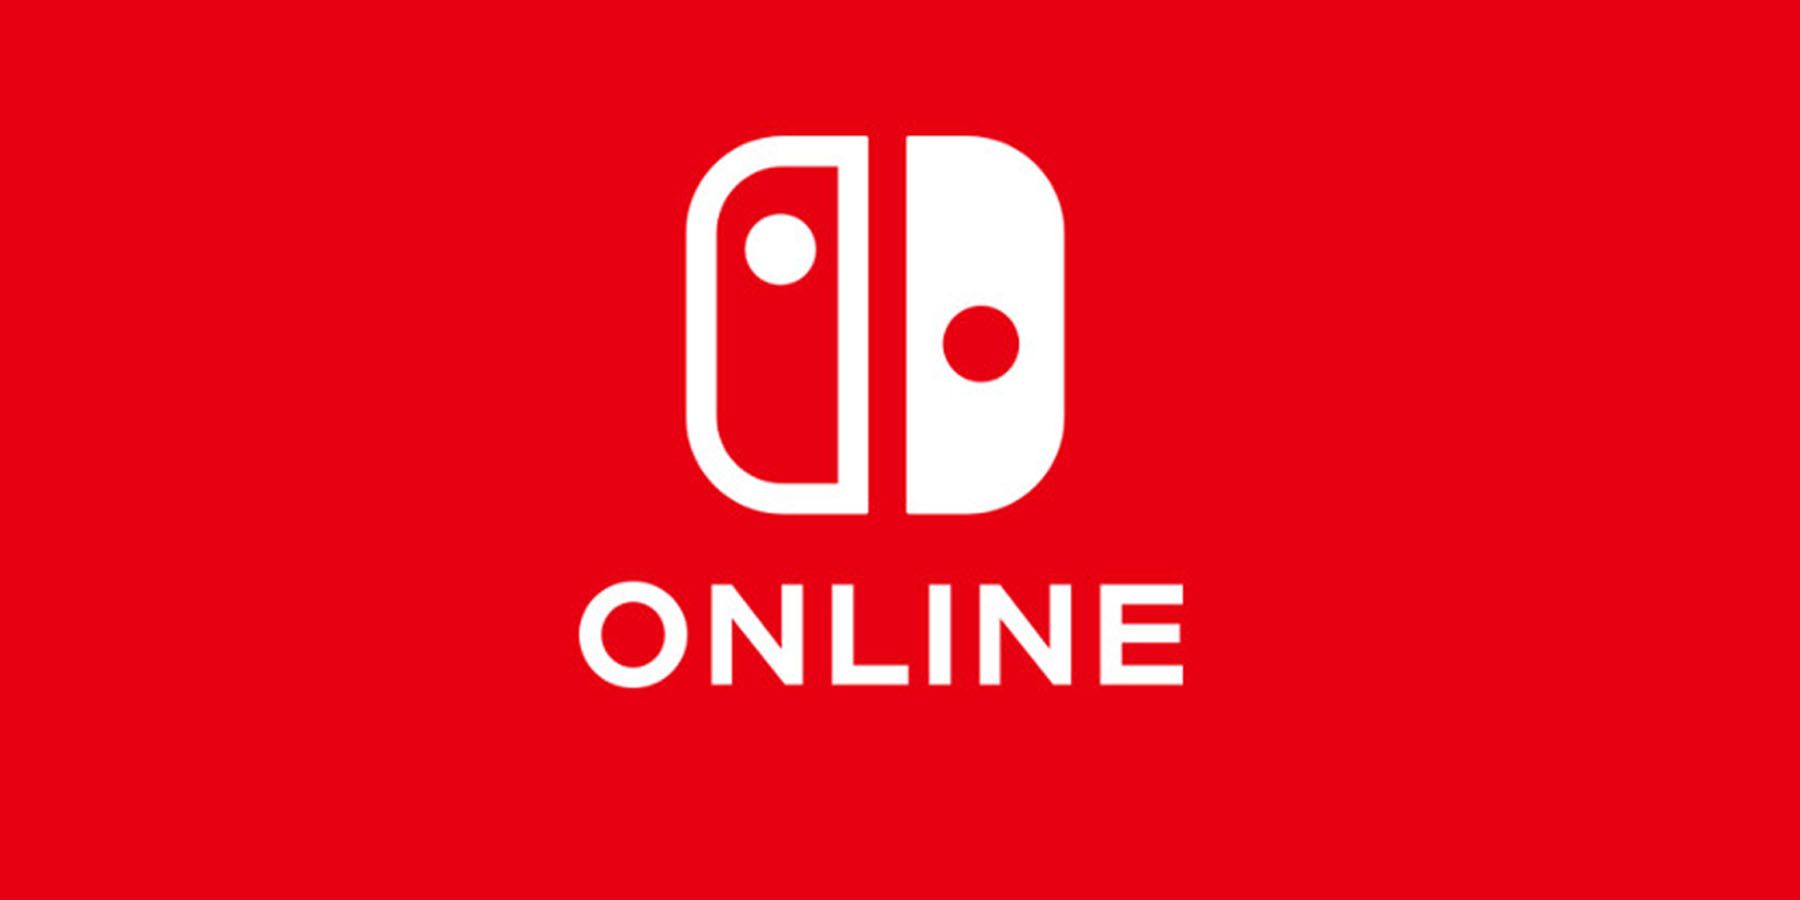 A white Nintendo Switch Online logo against a red background.